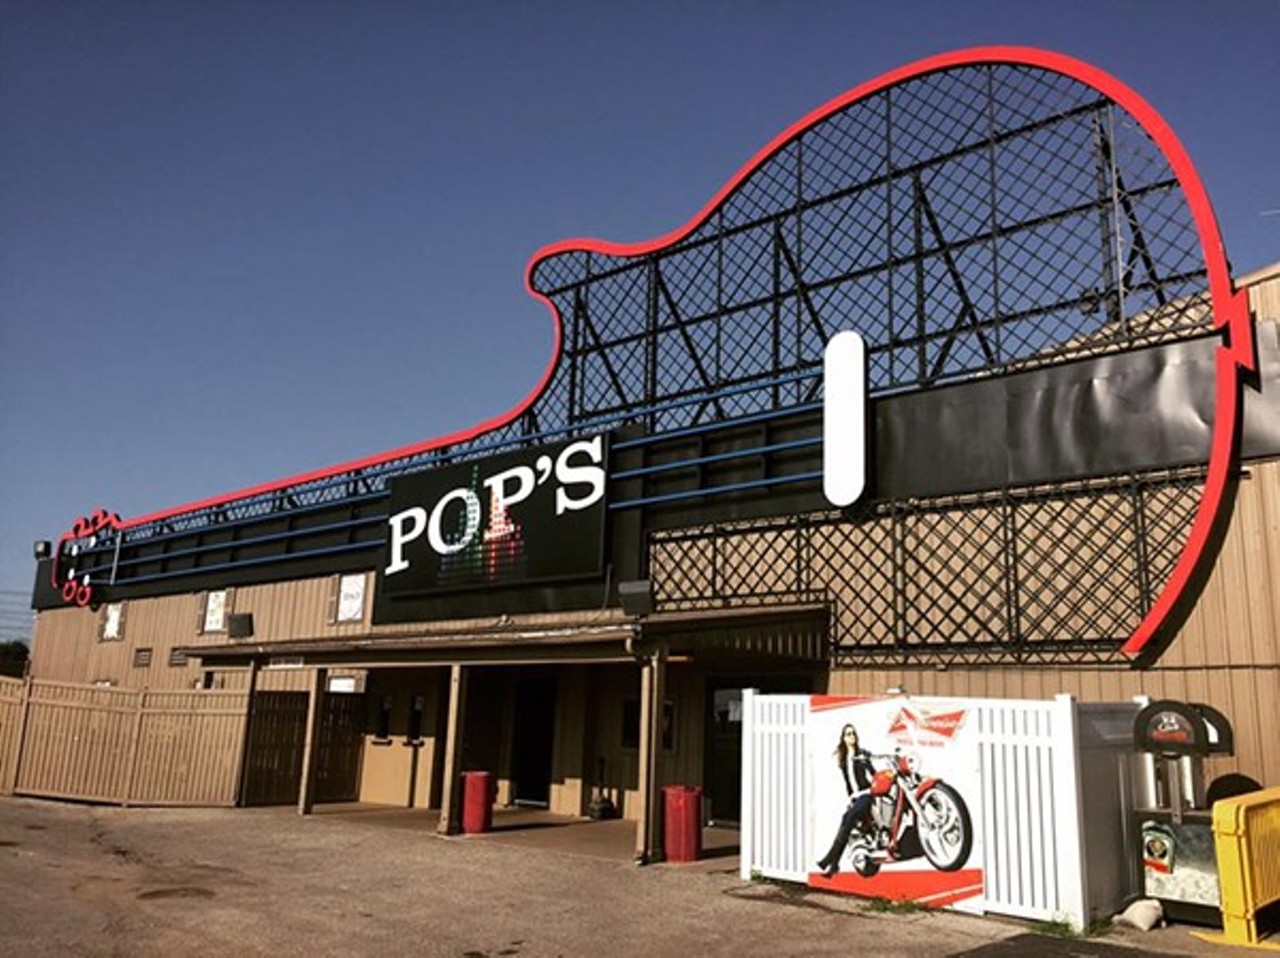 Pop's
Time has no meaning at Pop&#146;s Nightclub (401 Monsanto Avenue, Sauget, Illinois; 618-274-6720). Lesser bars may concern themselves with things like &#147;closing time&#148; and &#147;last call&#148; &#151; not Pop&#146;s. Open 24 hours every day but Sunday, this Sauget spot is for day-drinkers and night-drinkers and everything-in-betweeners. Your favorite St. Louis bar closes at 3 a.m., but you&#146;re still thirsty? Not a problem; just point your car east. Still got money in your pocket after the nearby strip clubs close? Pop&#146;s will take it off your hands and replace it with something sudsy and cold. On Sundays the staff shoos people out at 10 a.m. and the doors don&#146;t reopen until 11 p.m., but luckily St. Louis has plenty of bars that are open during those hours. Pop&#146;s, meanwhile, will be there for you when those bars aren&#146;t.
Photo courtesy of Ryan Kelley